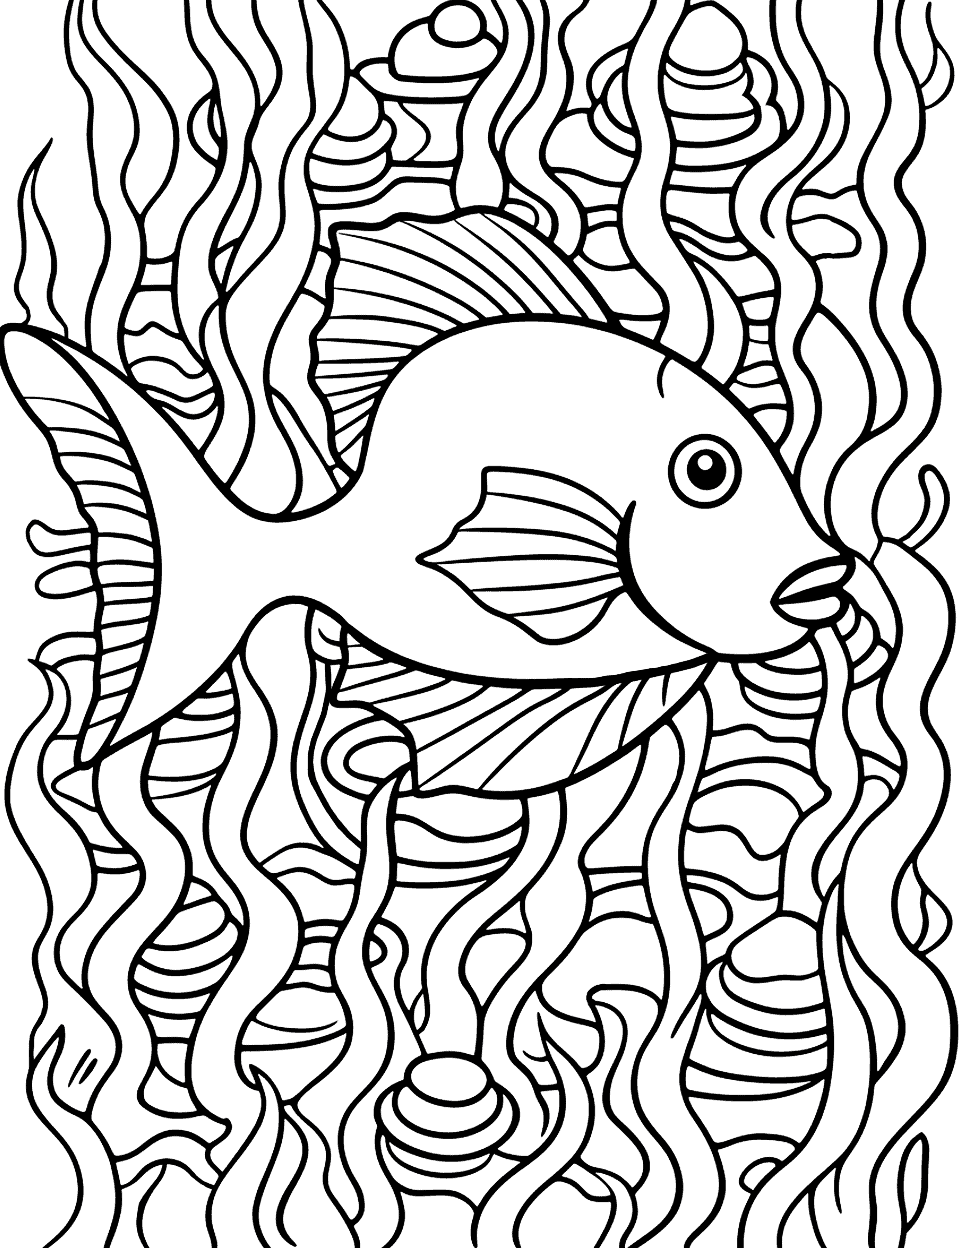 Maze of Coral and Fish Coloring Page - A maze made of coral structures, with a fish guiding the way.